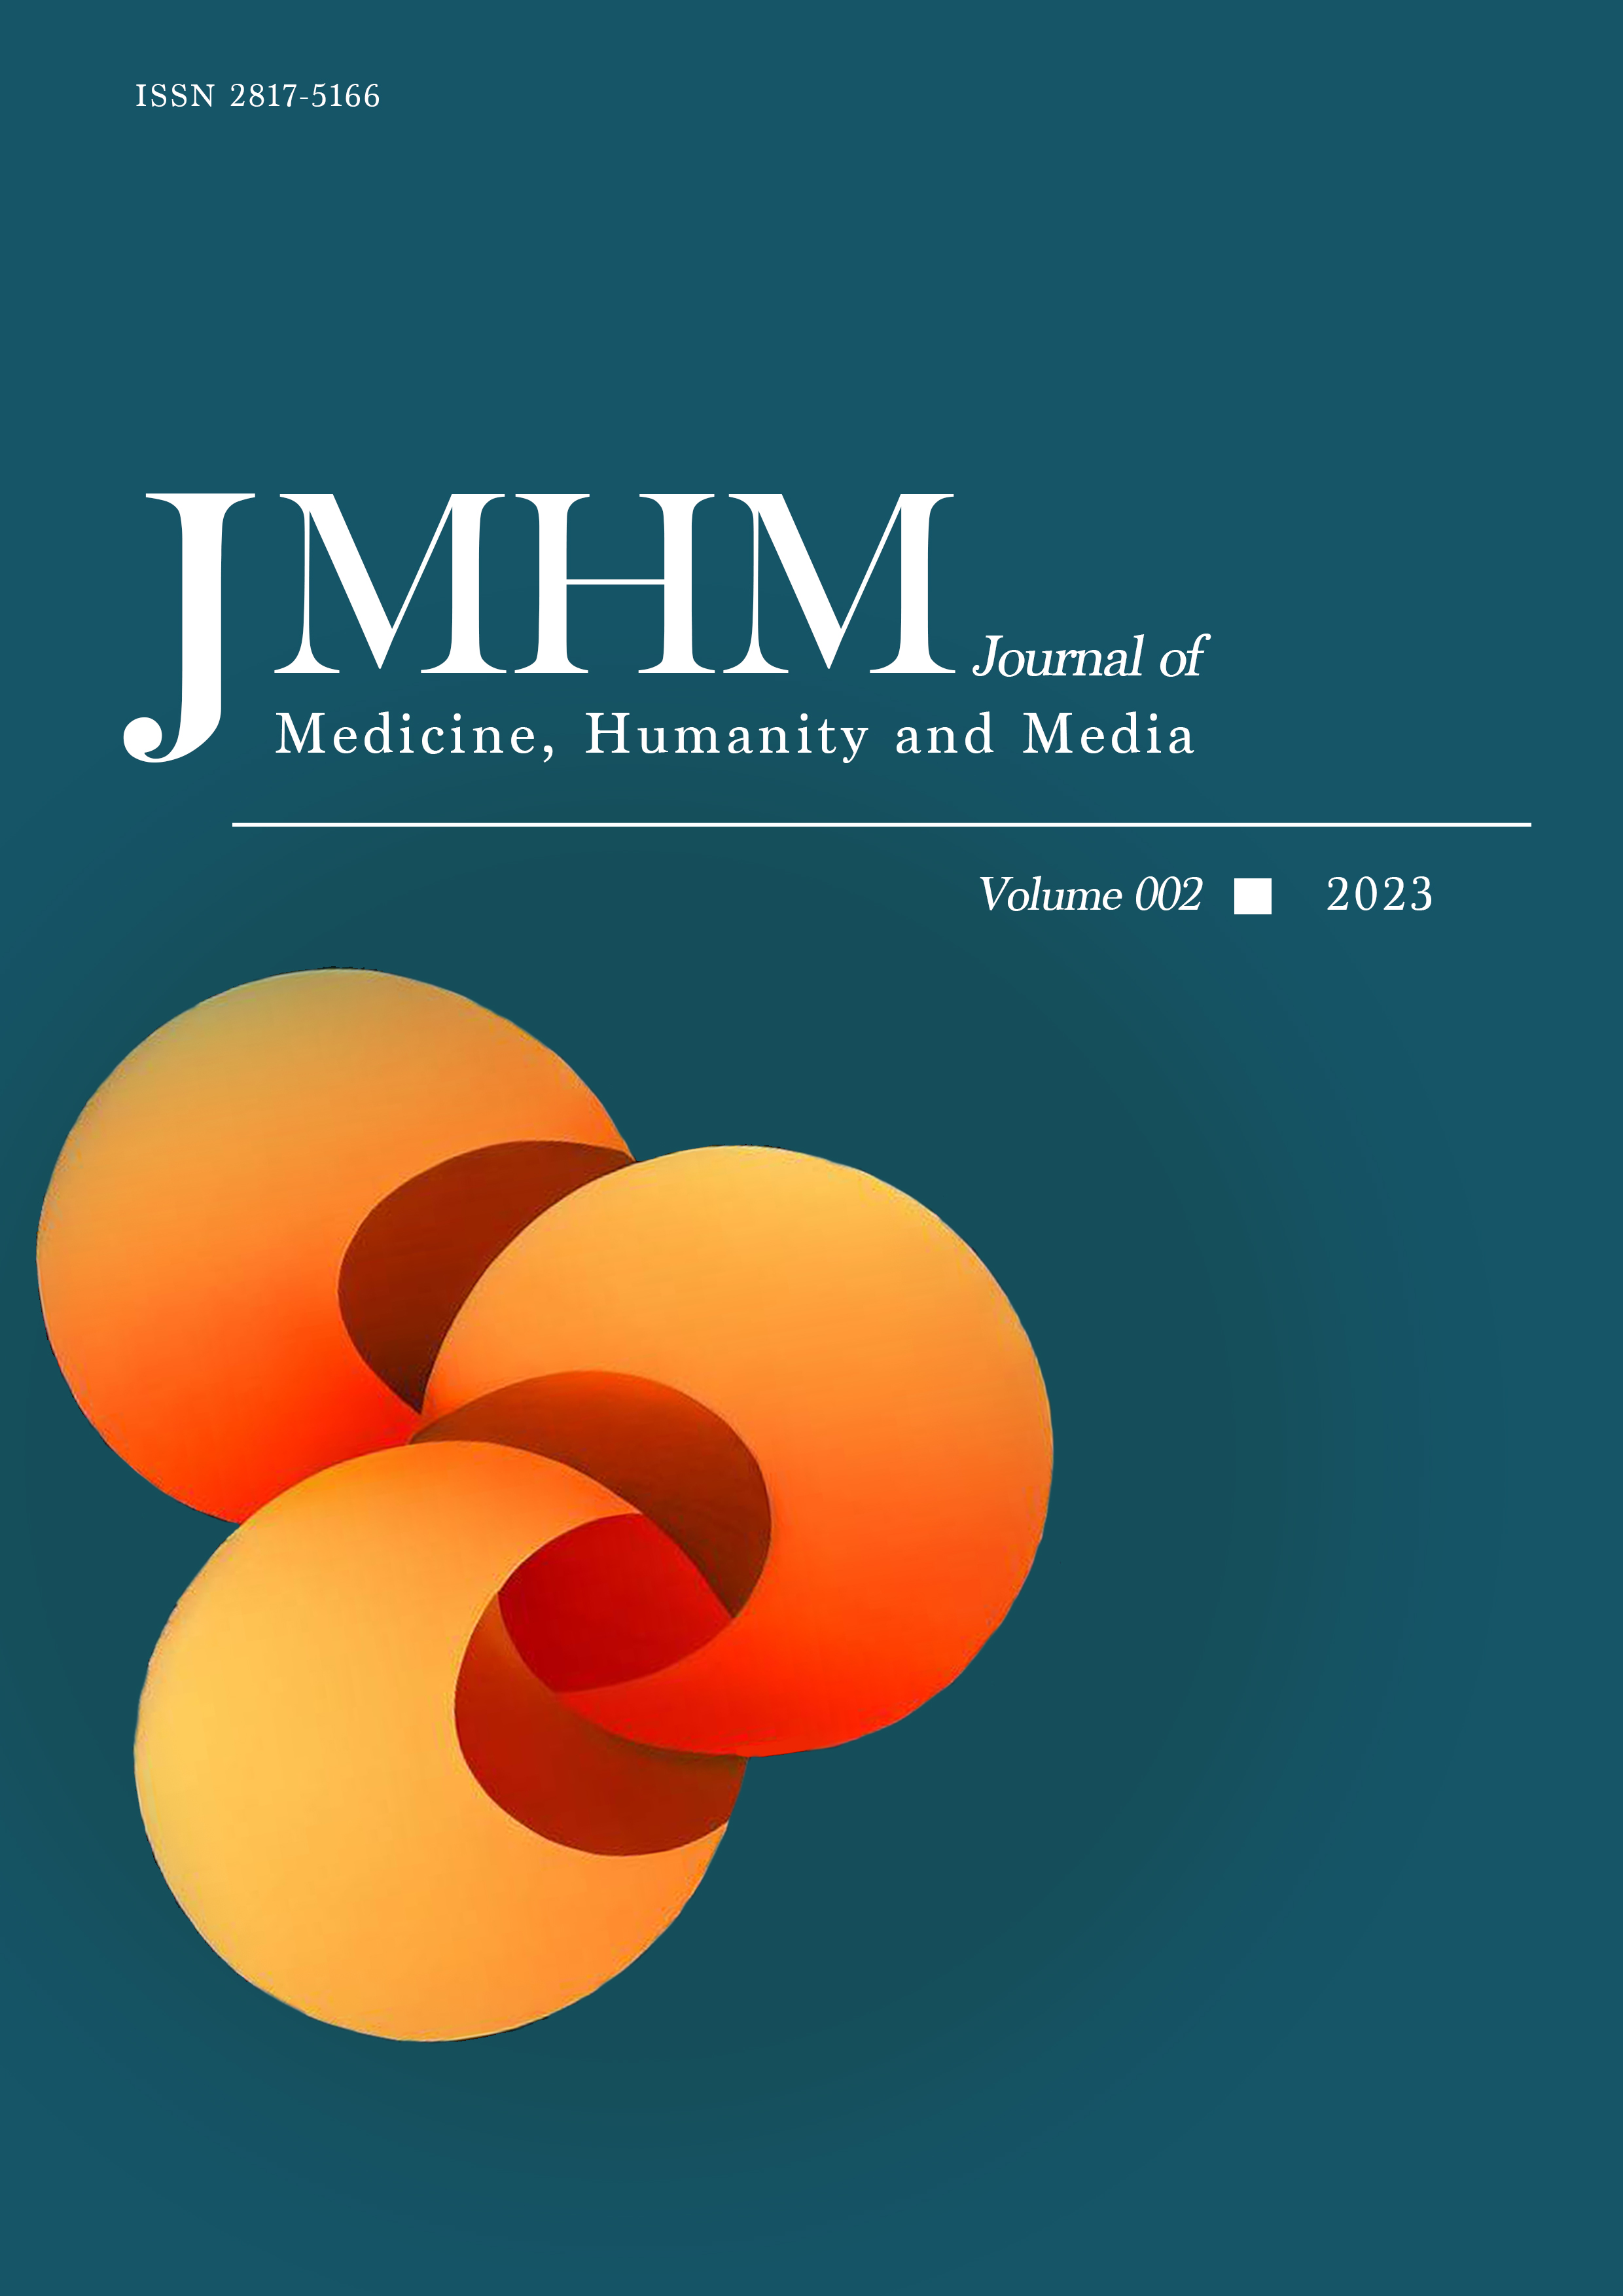 					View Vol. 1 No. 2 (2023): The Journal of Medicine, Humanity and Media
				